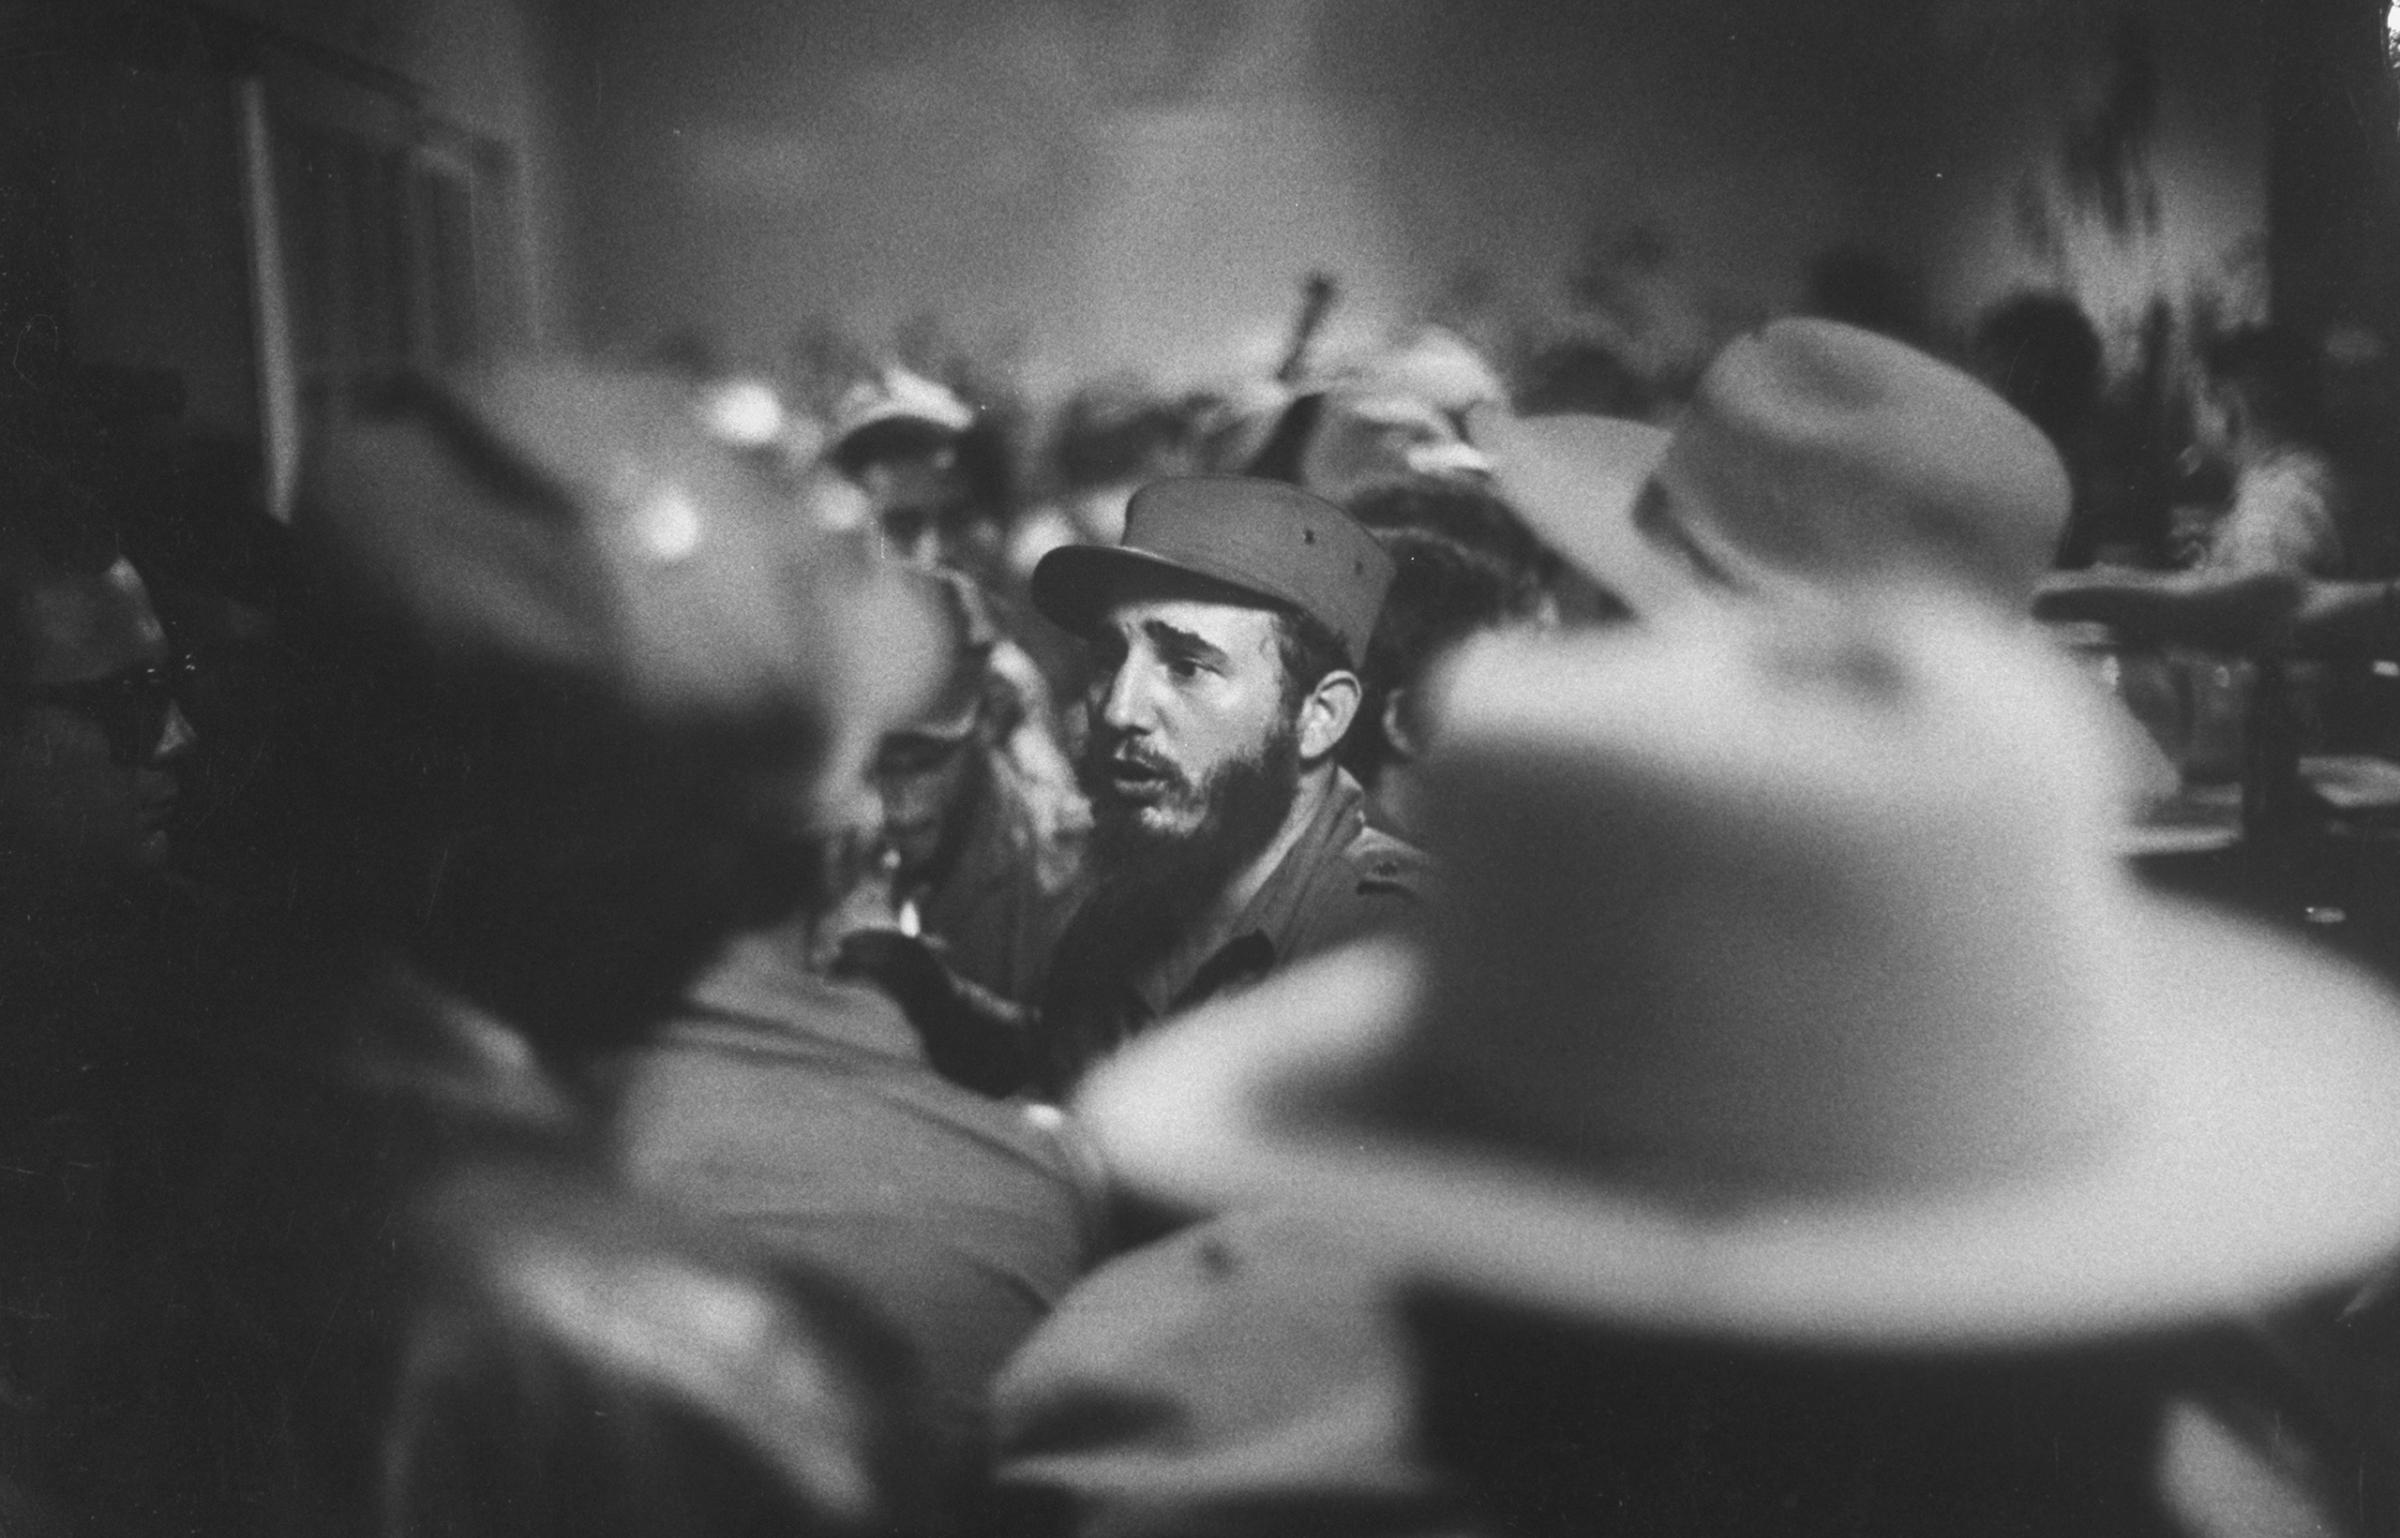 Rebel leader Fidel Castro being cheered by the crowds on his victorious march to Havana.